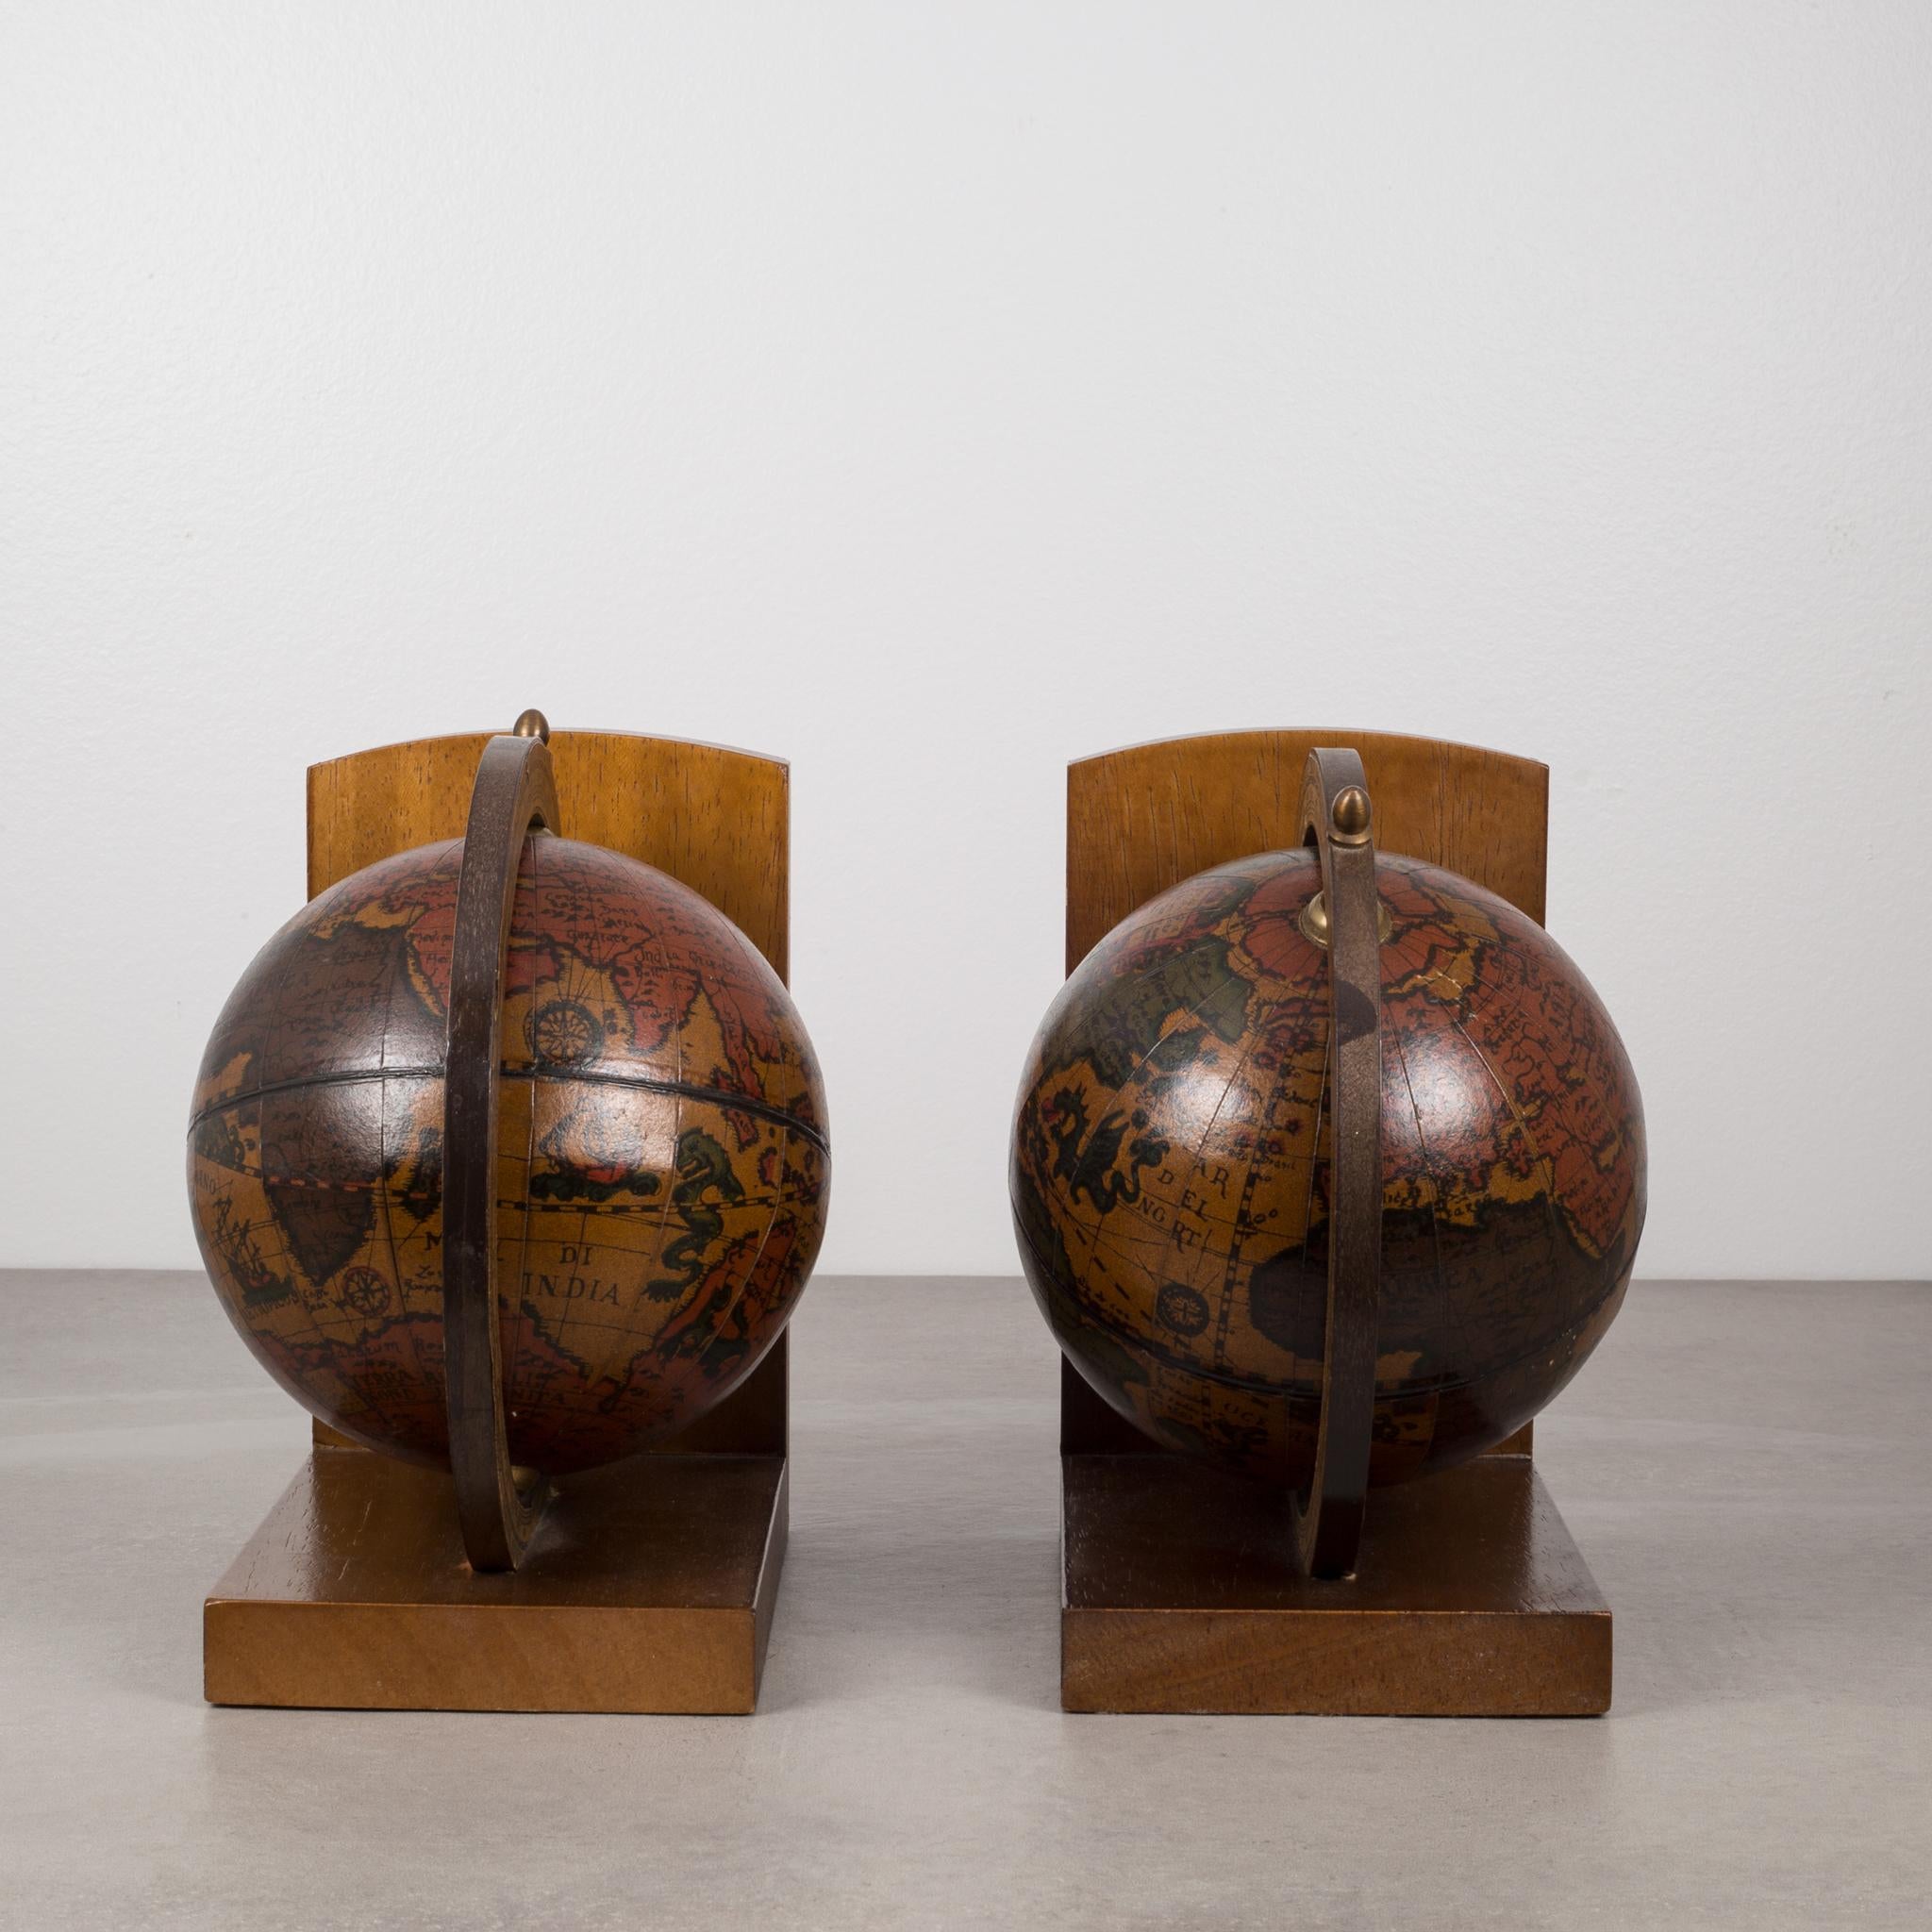 Italian Pair of Rotating Globe Bookends with Brass Tips, circa 1950s-1970s